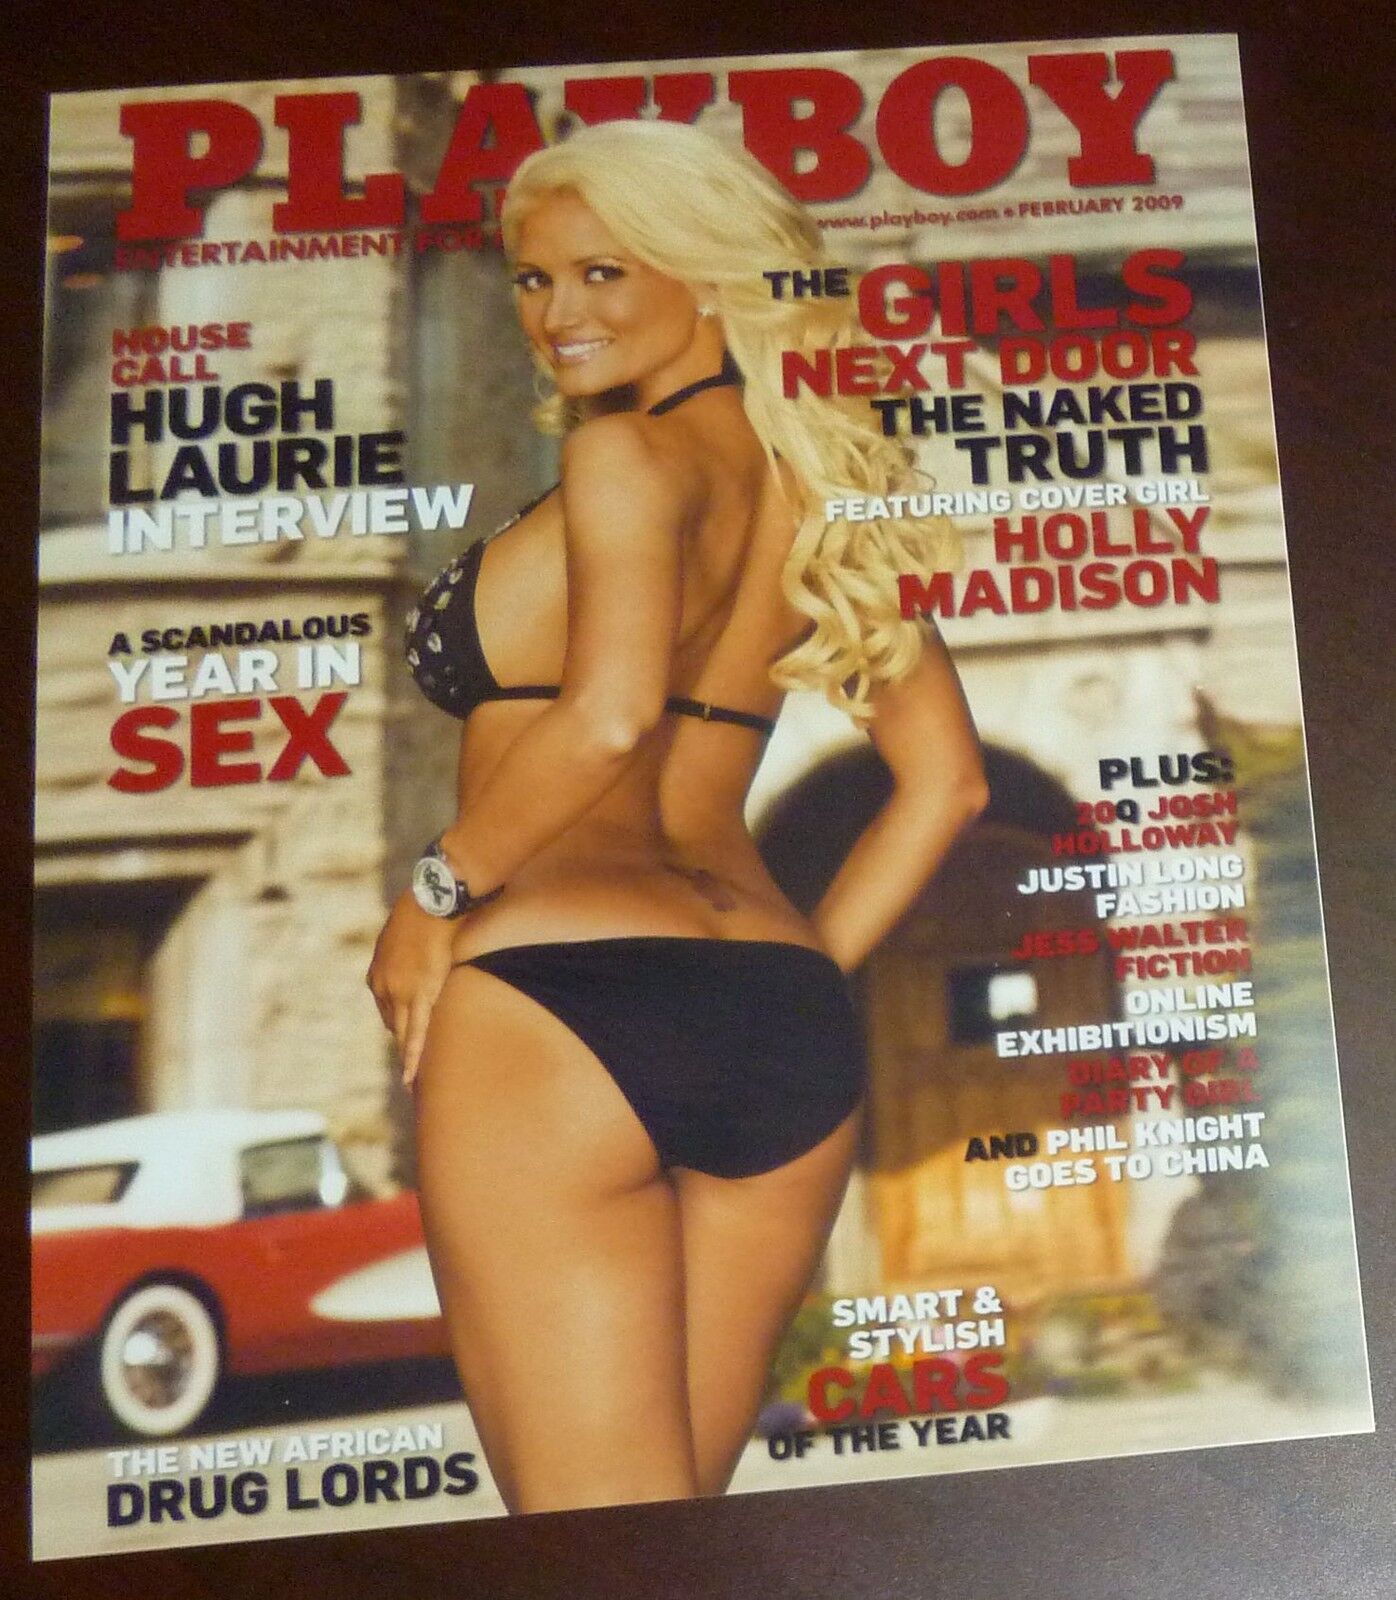 Holly Madison Playboy February 2009 Cover 16x20 Photo Poster painting Poster The Girls Next Door